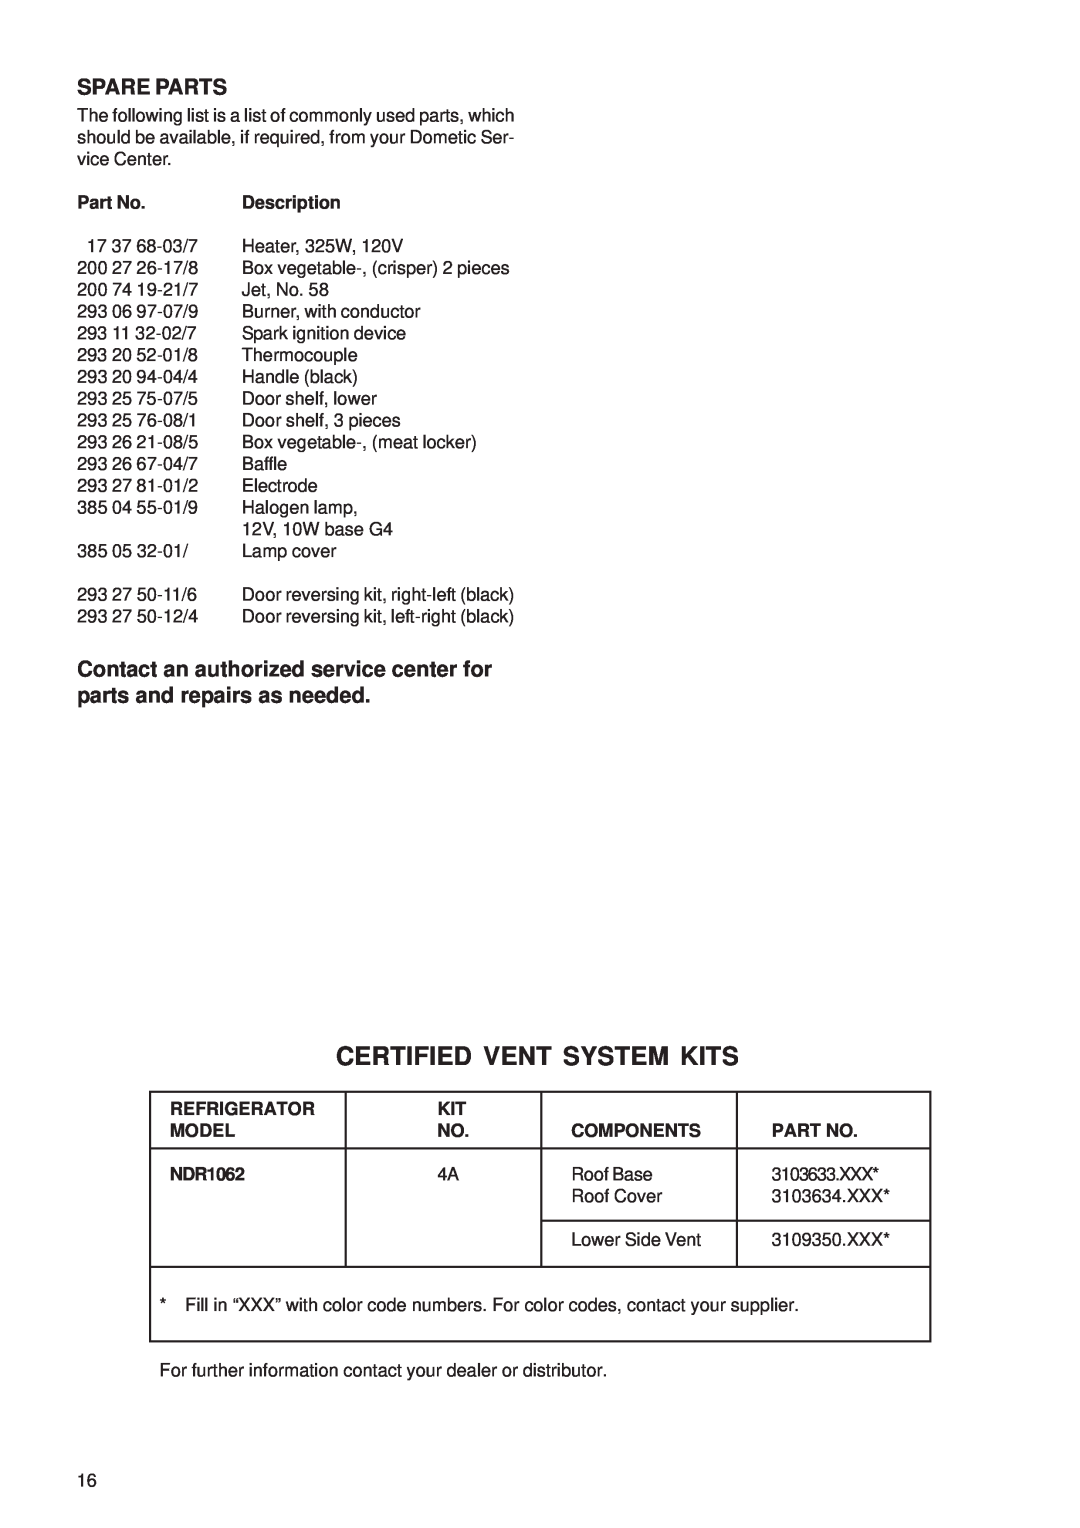 Dometic NDR1062 manual Certified Vent System Kits, Spare Parts, Description, Refrigerator, Model, Components, Roof Base 